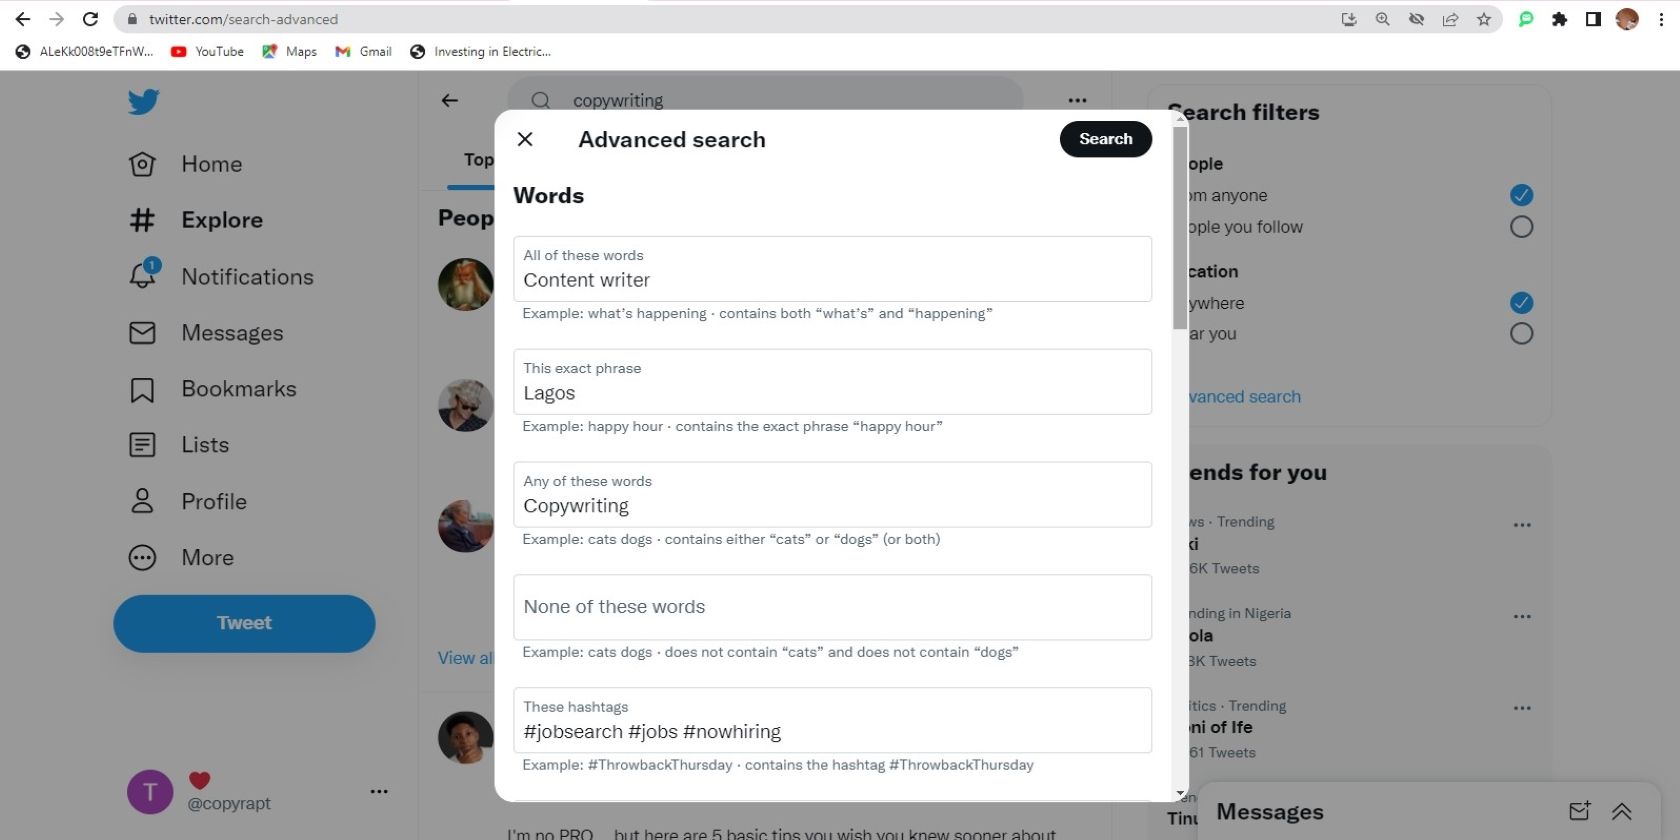 Using the Advanced search features to find a job on Twitter.